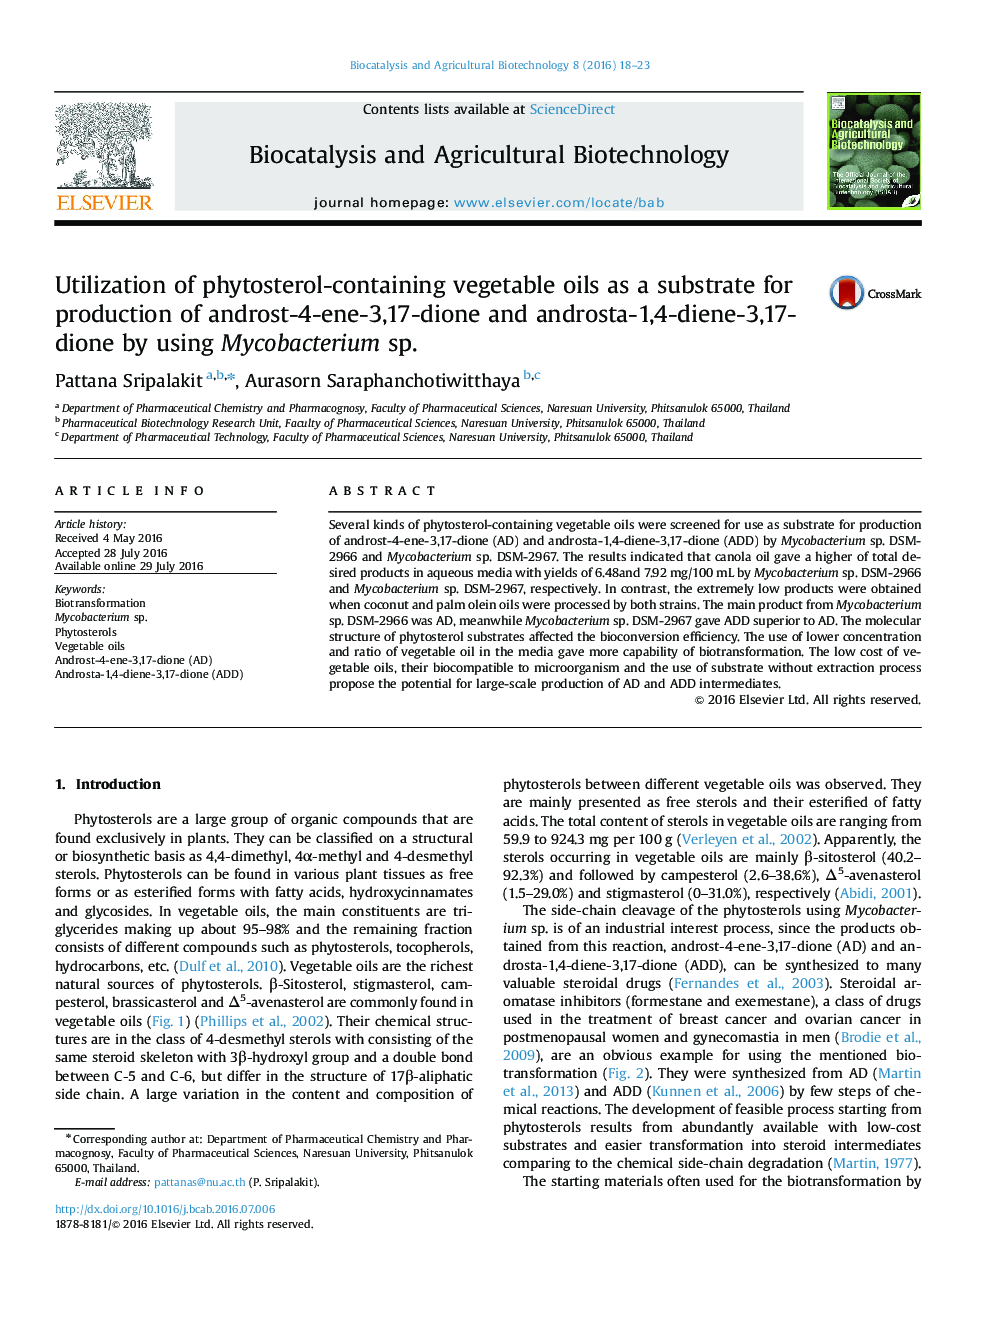 Utilization of phytosterol-containing vegetable oils as a substrate for production of androst-4-ene-3,17-dione and androsta-1,4-diene-3,17-dione by using Mycobacterium sp.